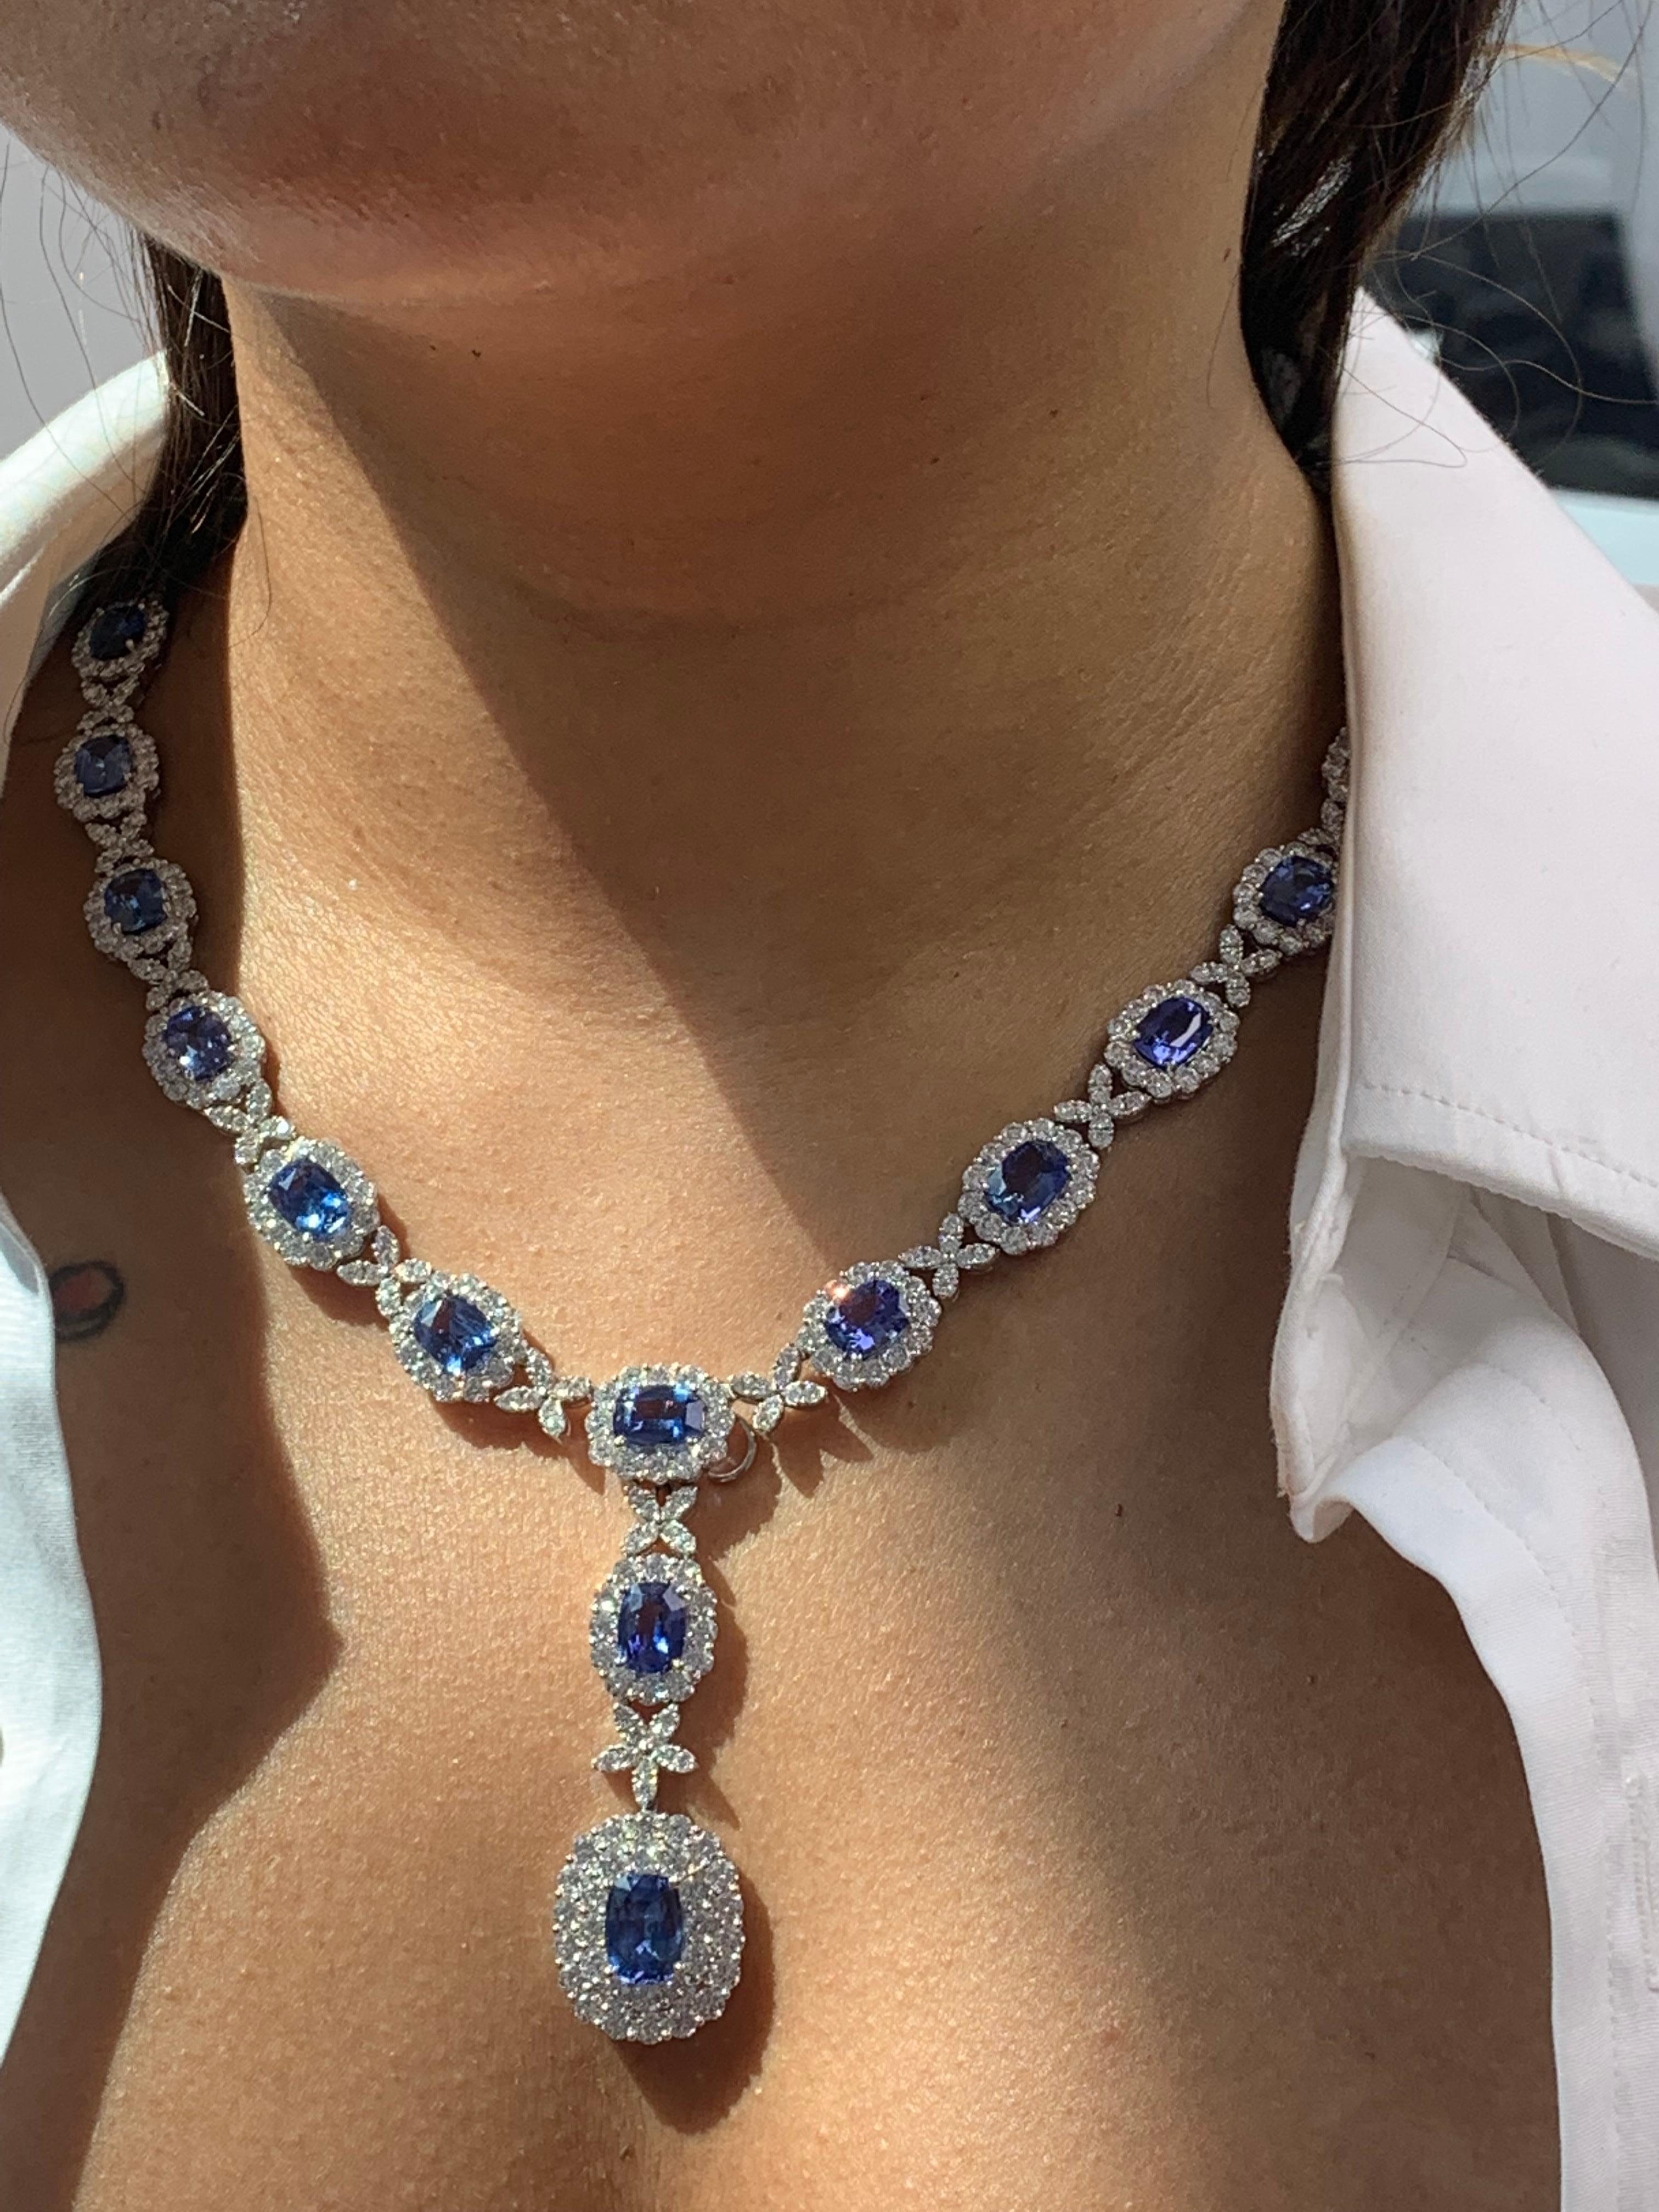 A unique and chic necklace showcasing a drop pendant with 25oval cut blue sapphires, drop pendant 1 sapphire is surrounded by two rows of round brilliant diamonds. The pendant is suspended on a blue sapphire and diamond halo necklace and each